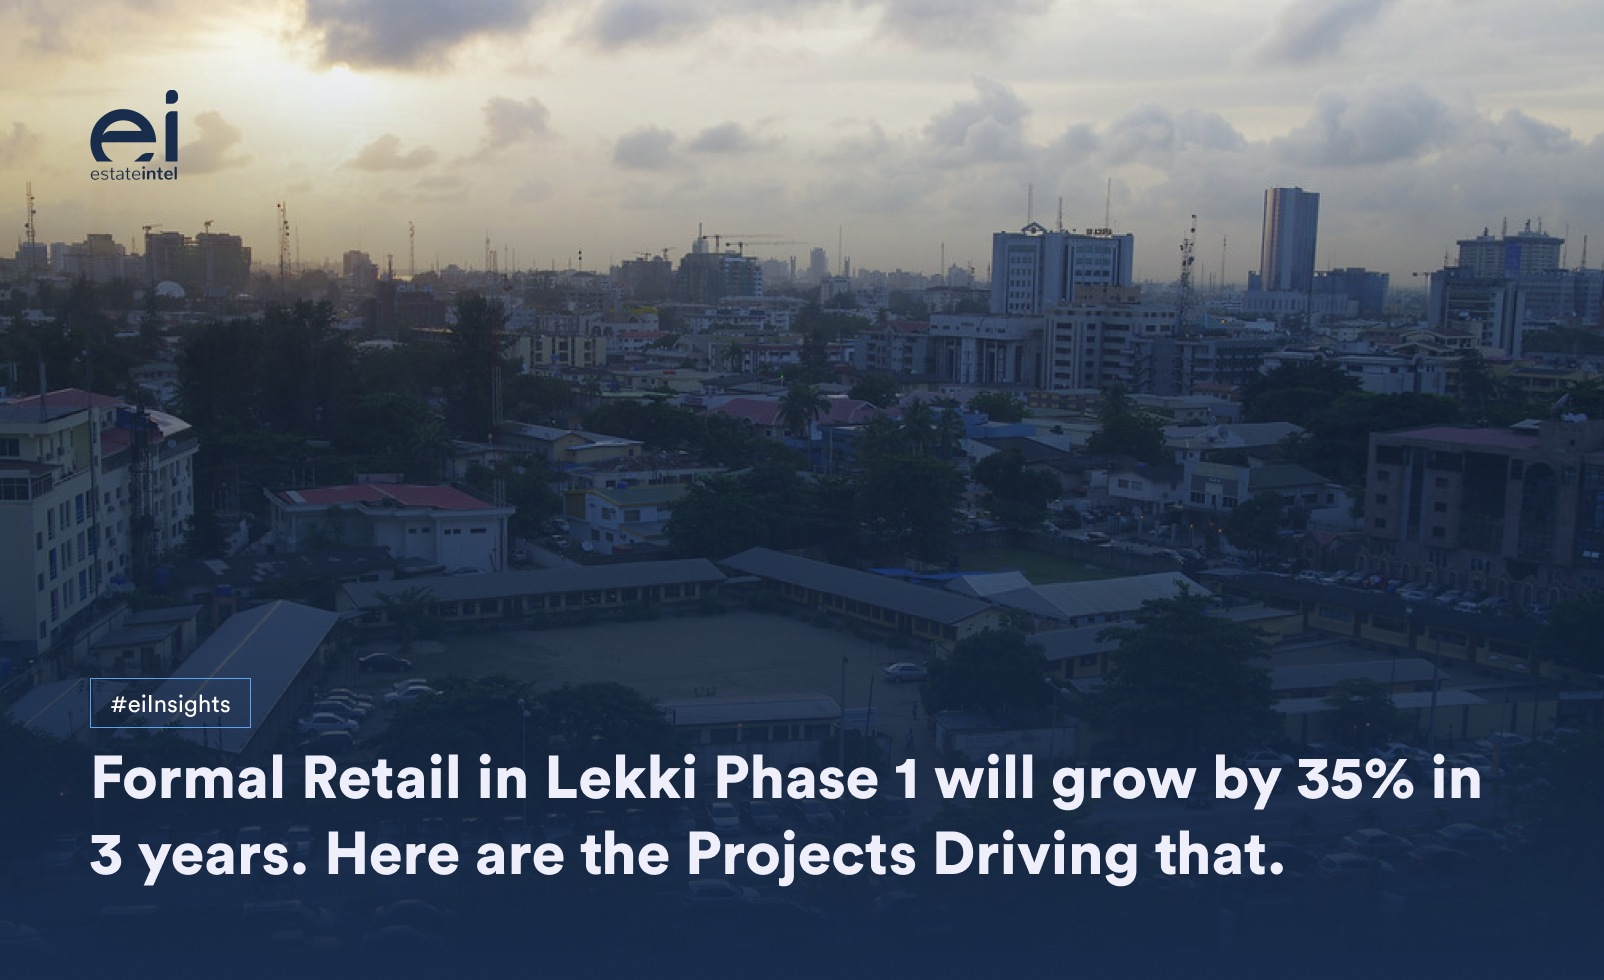 Formal Retail in Lekki Phase 1 will grow by 35% in 3 years; Here are the projects driving that